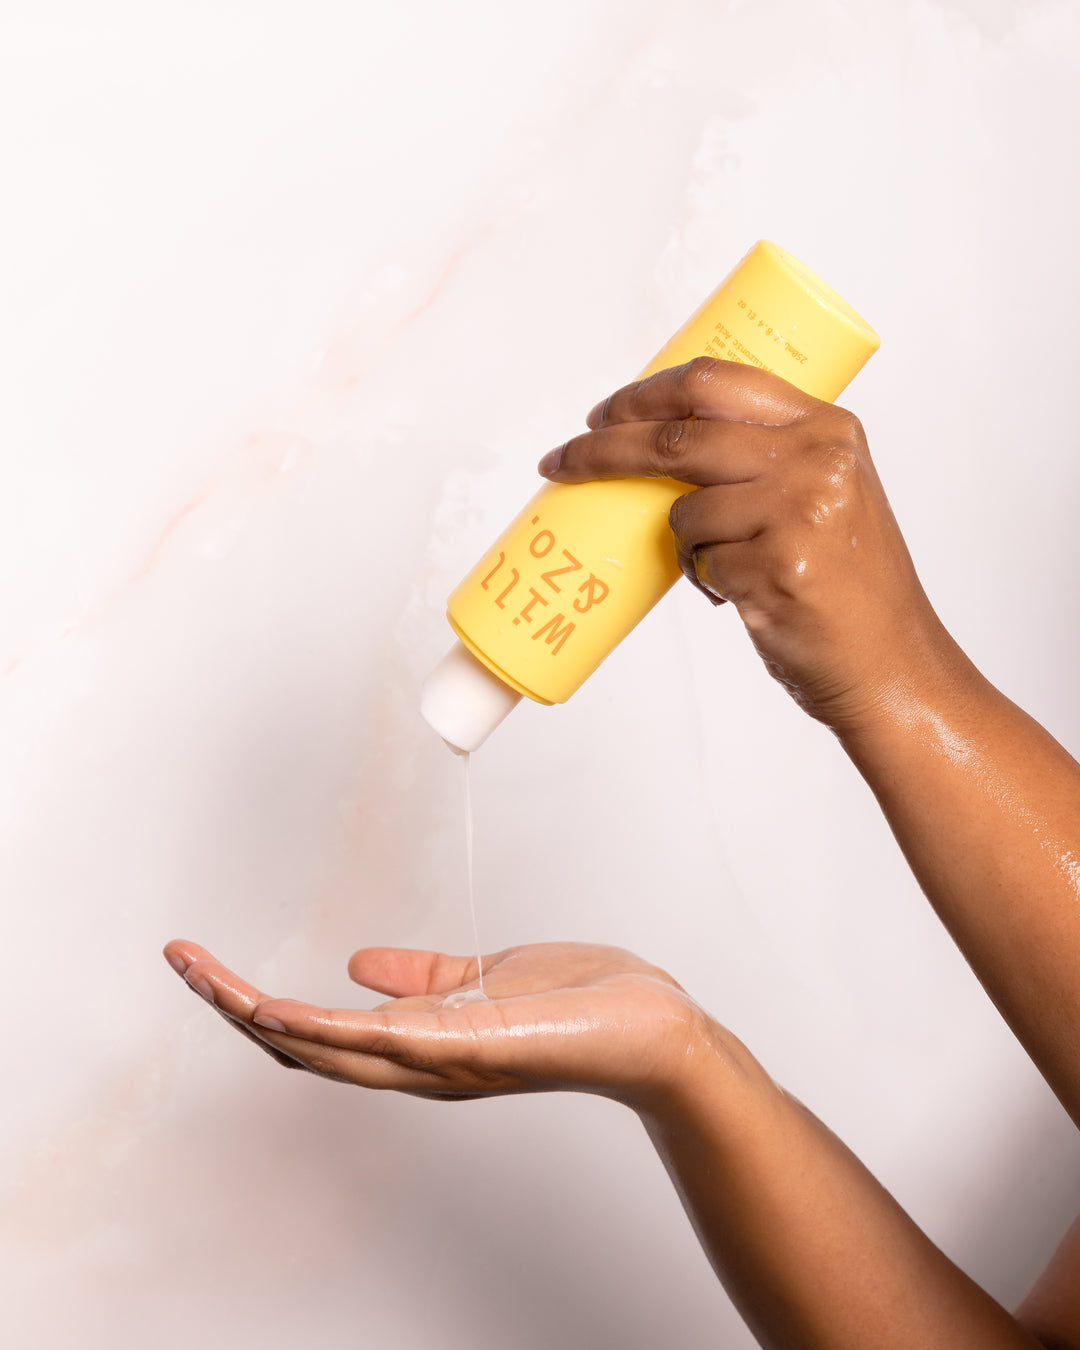 The Here Body Breakout Cleanser